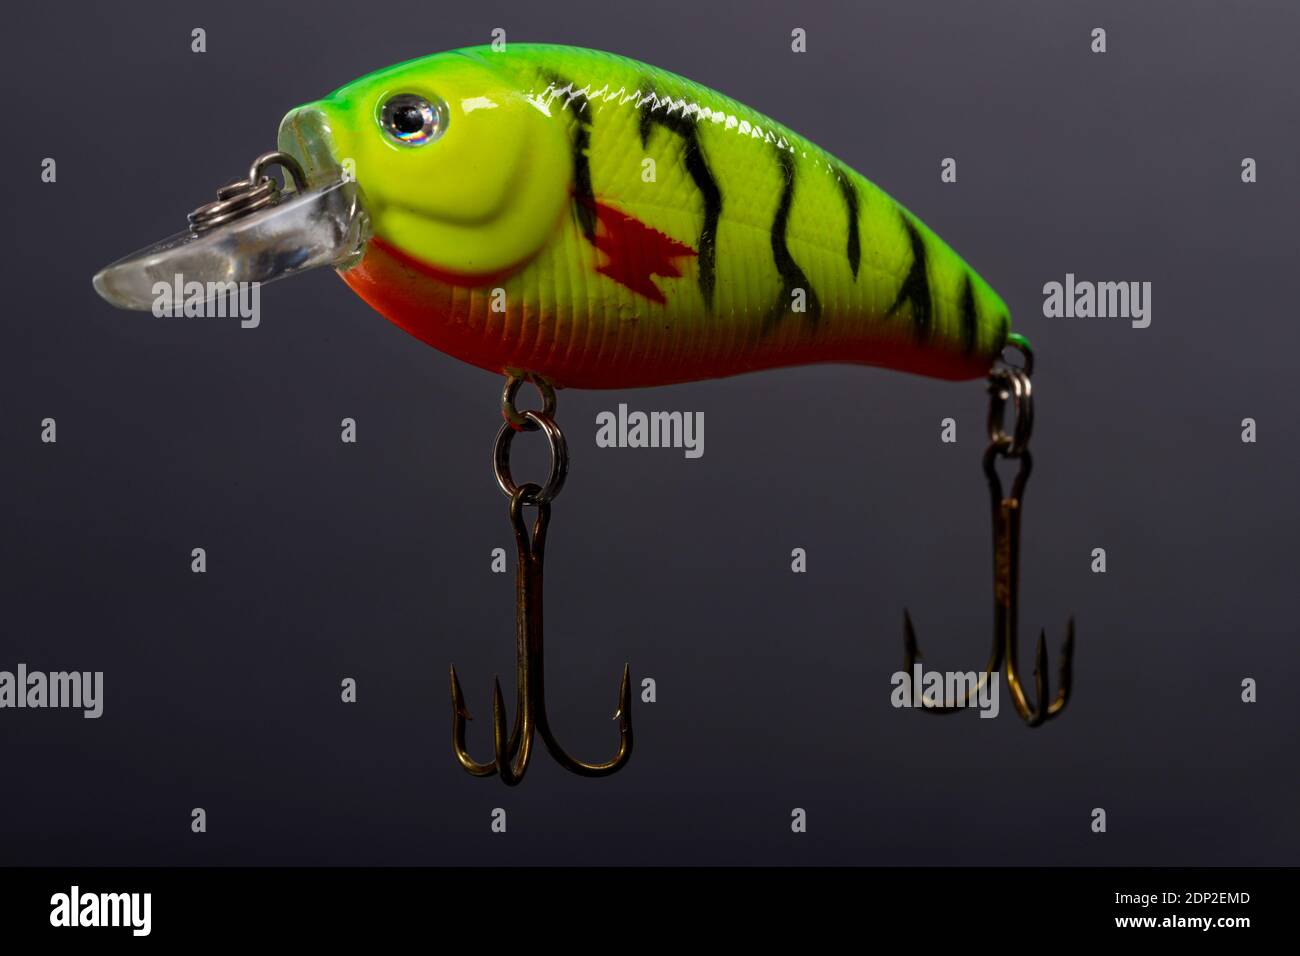 Brightly coloured hand-made fishing lure. Stock Photo